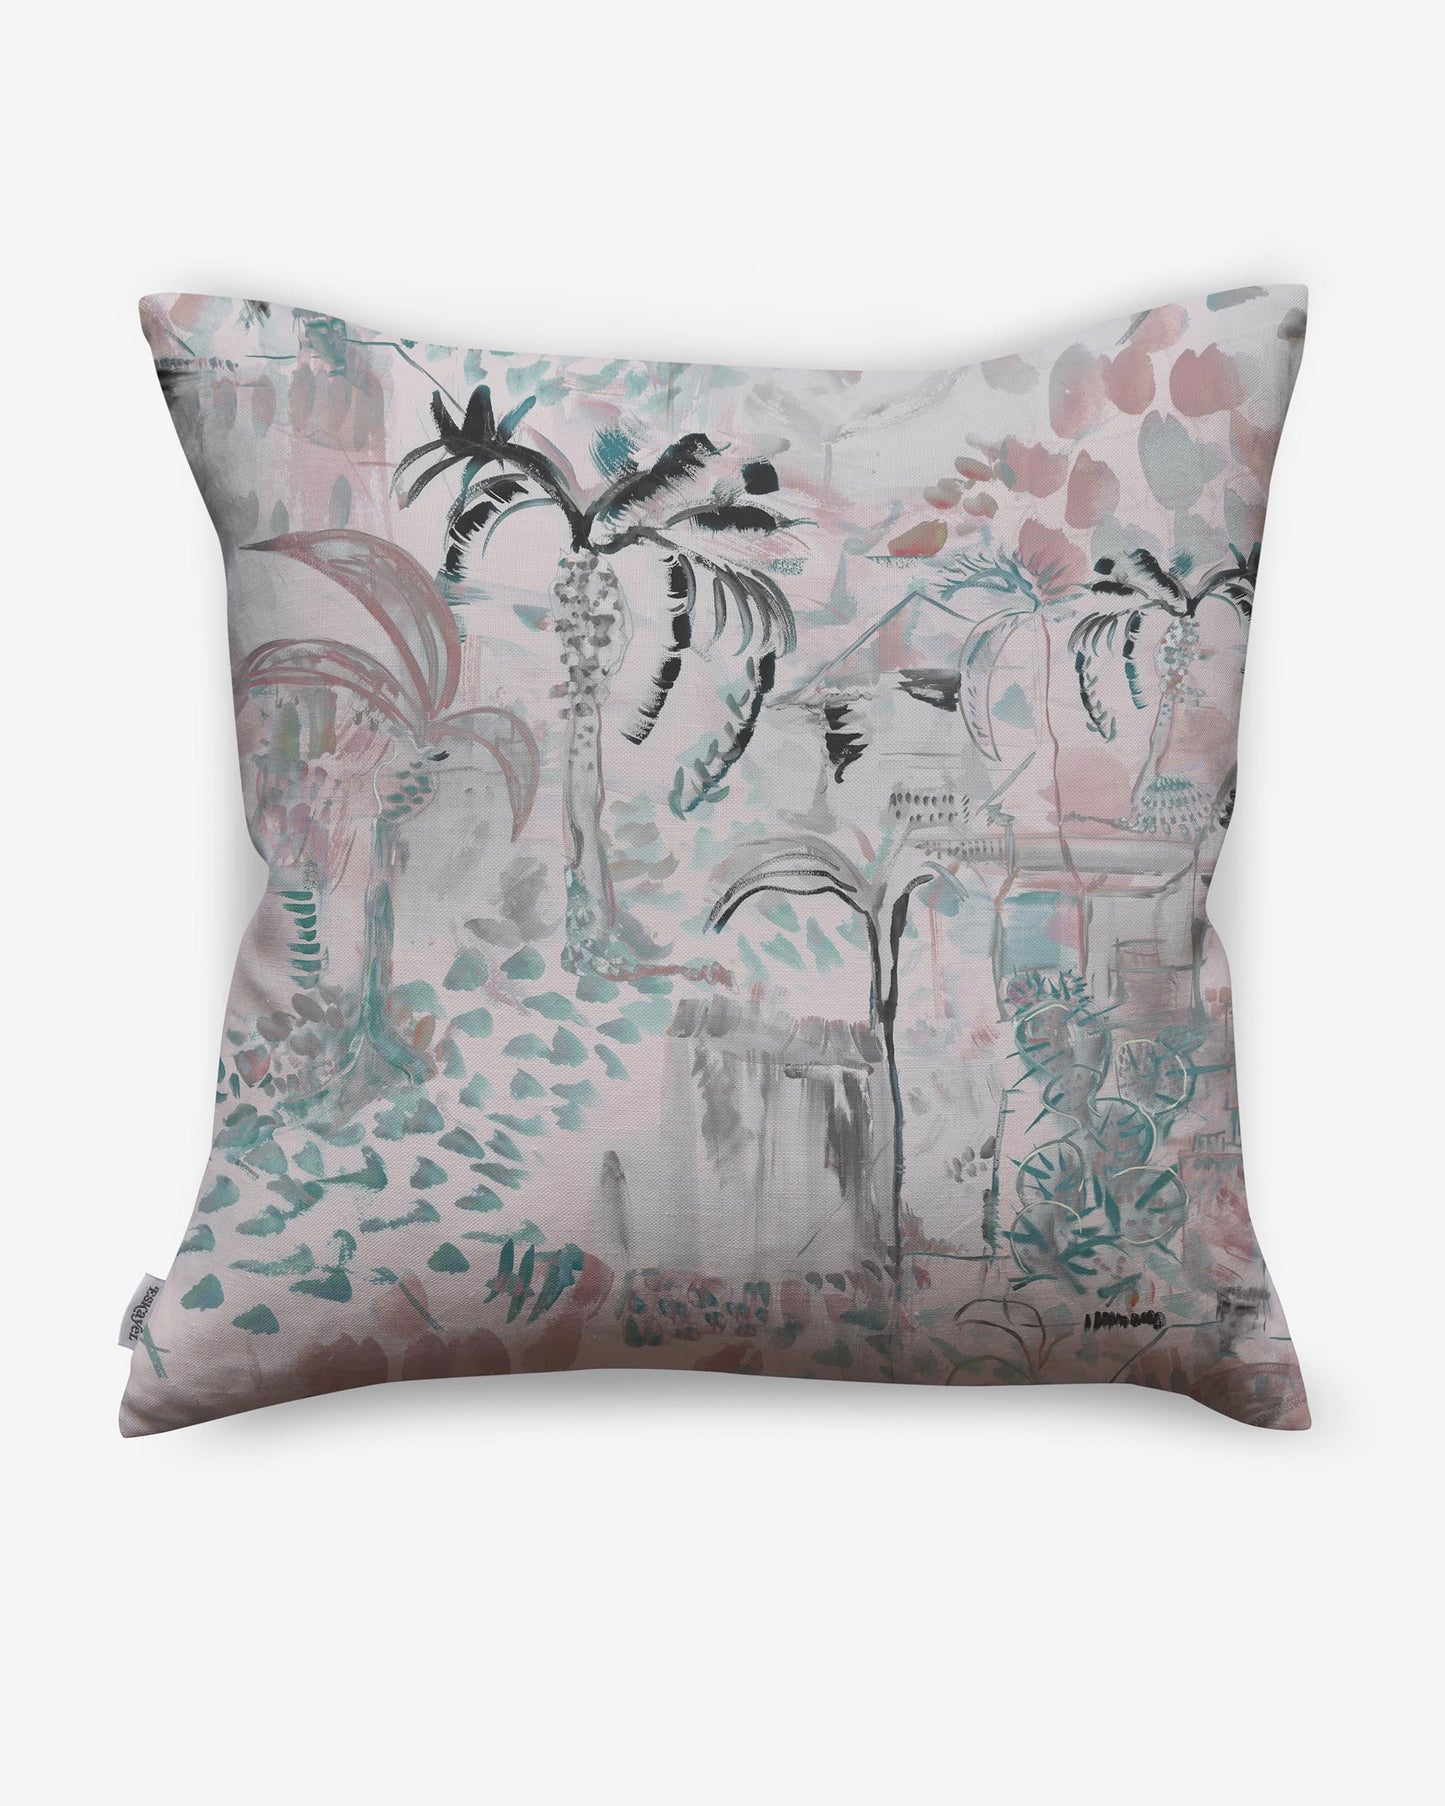 A pink and blue Souk Pillow Duomo with custom pillows on it